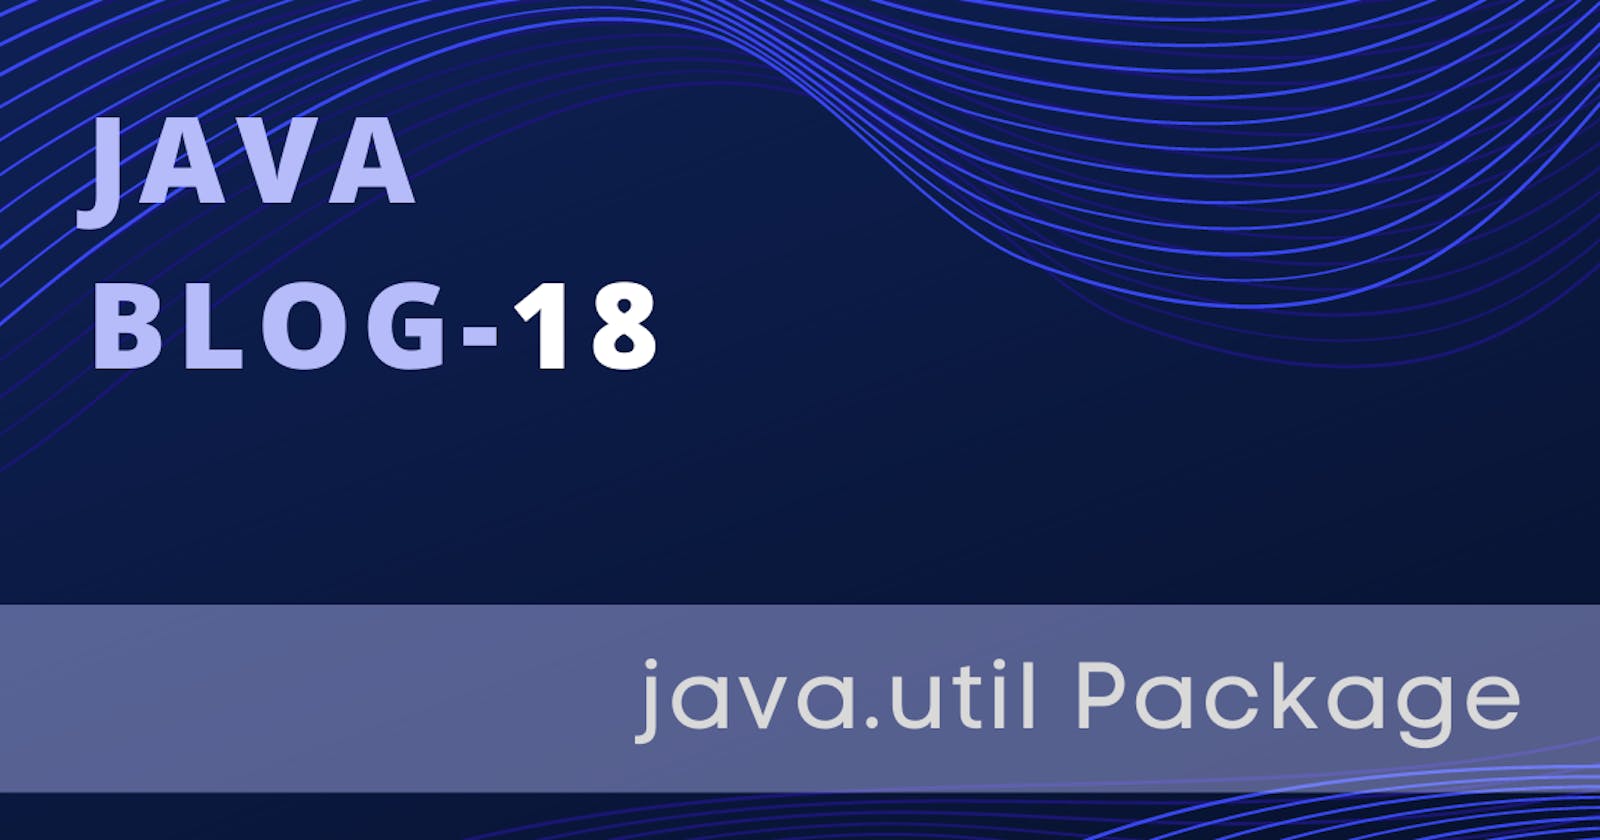 Introduction to java.util Package